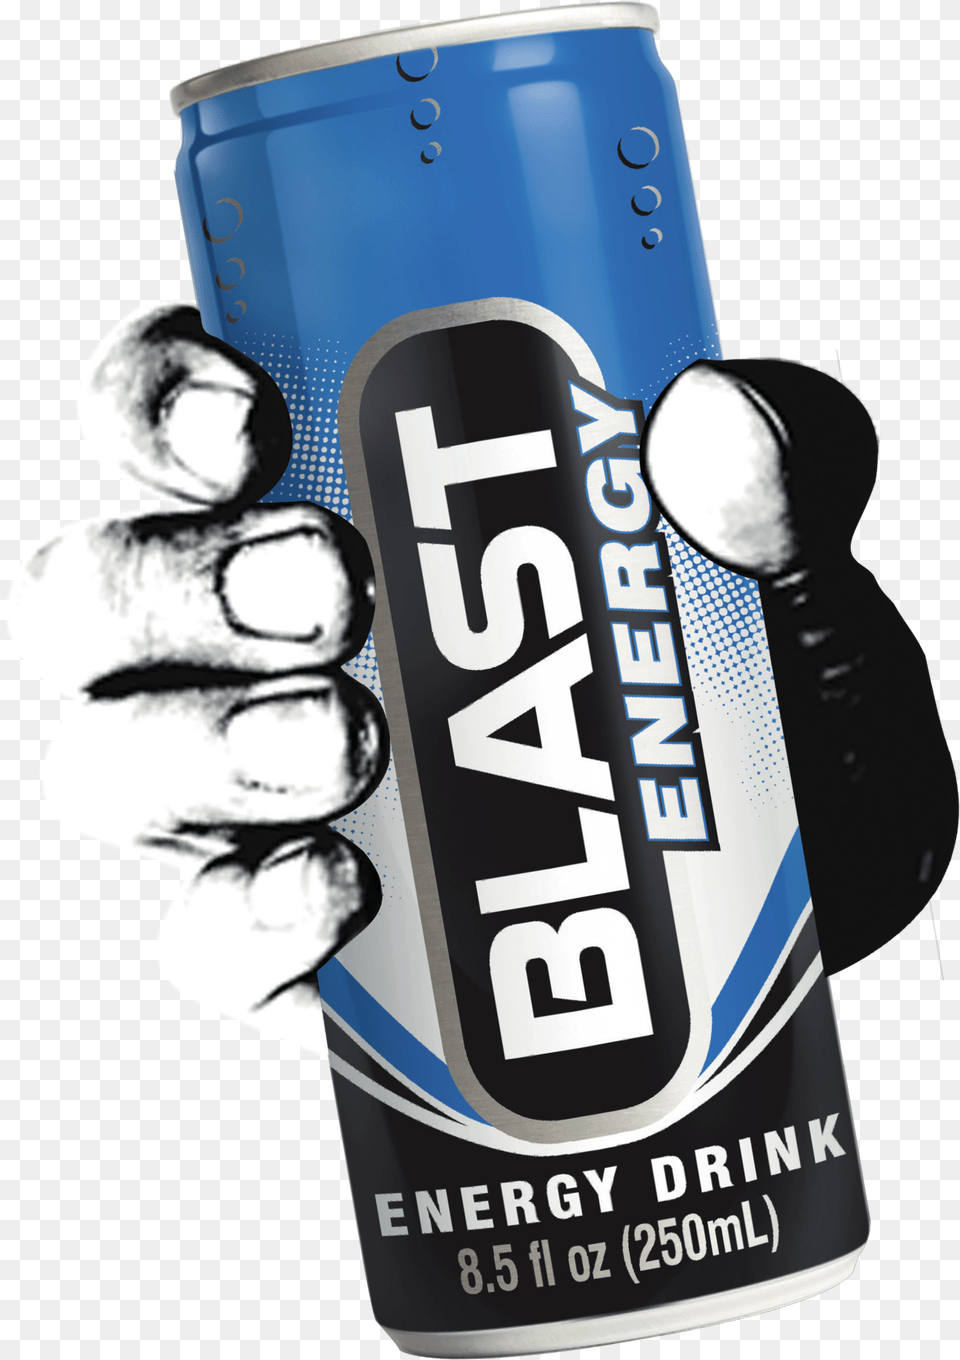 Caffeinated Drink Png Image